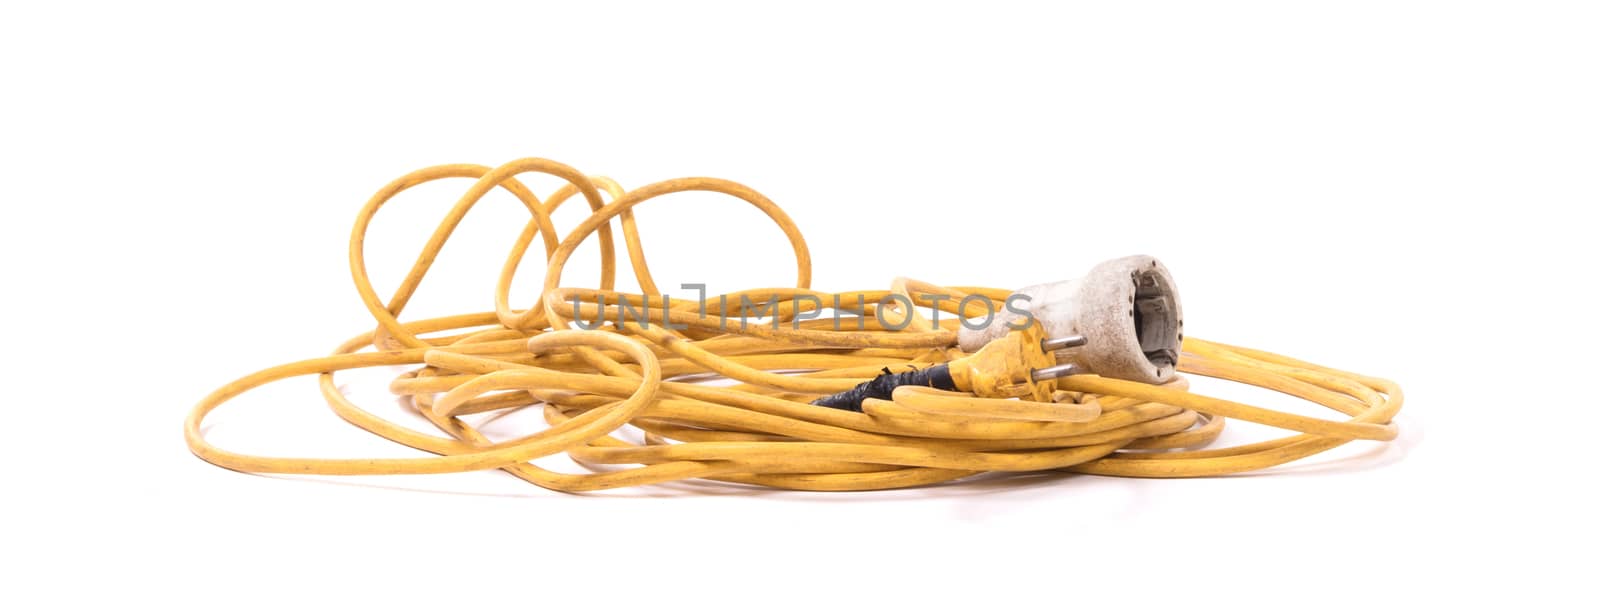 Extension cord, old and probably not safe anymore - Isolated on white